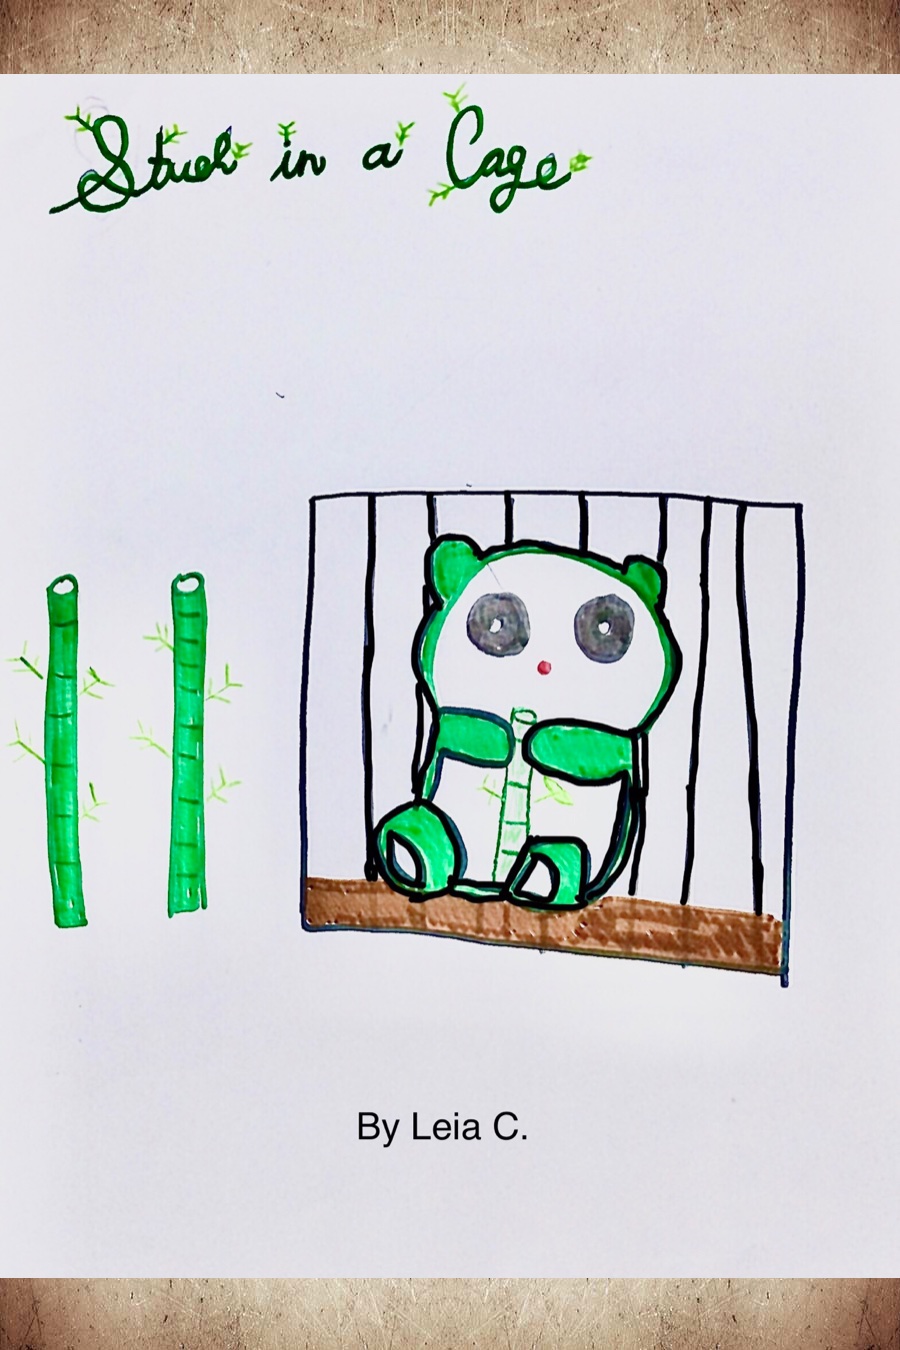 Stuck in a Cage by Leia C